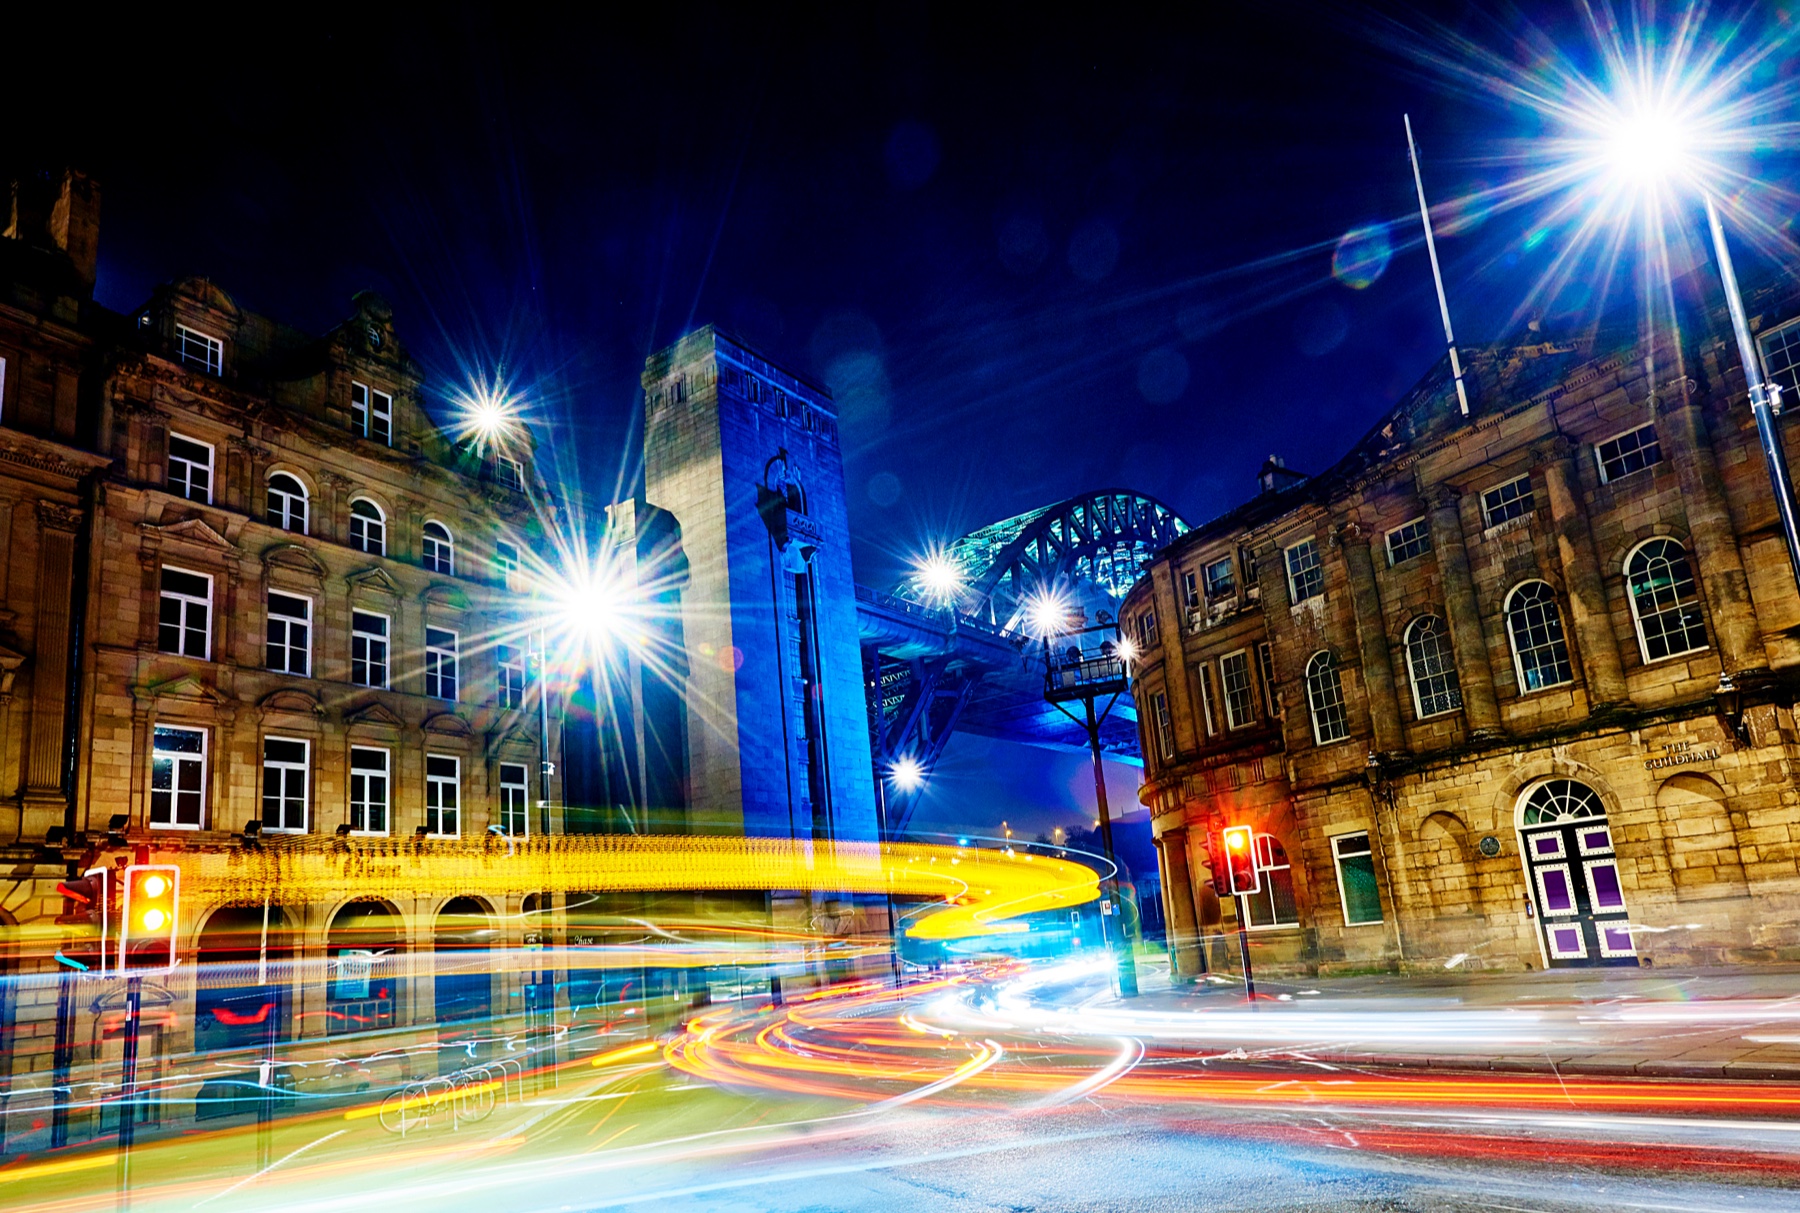 Streetscape of Newcastle upon Tyne by night, with lights from traffic creating a pattern and sense of movement